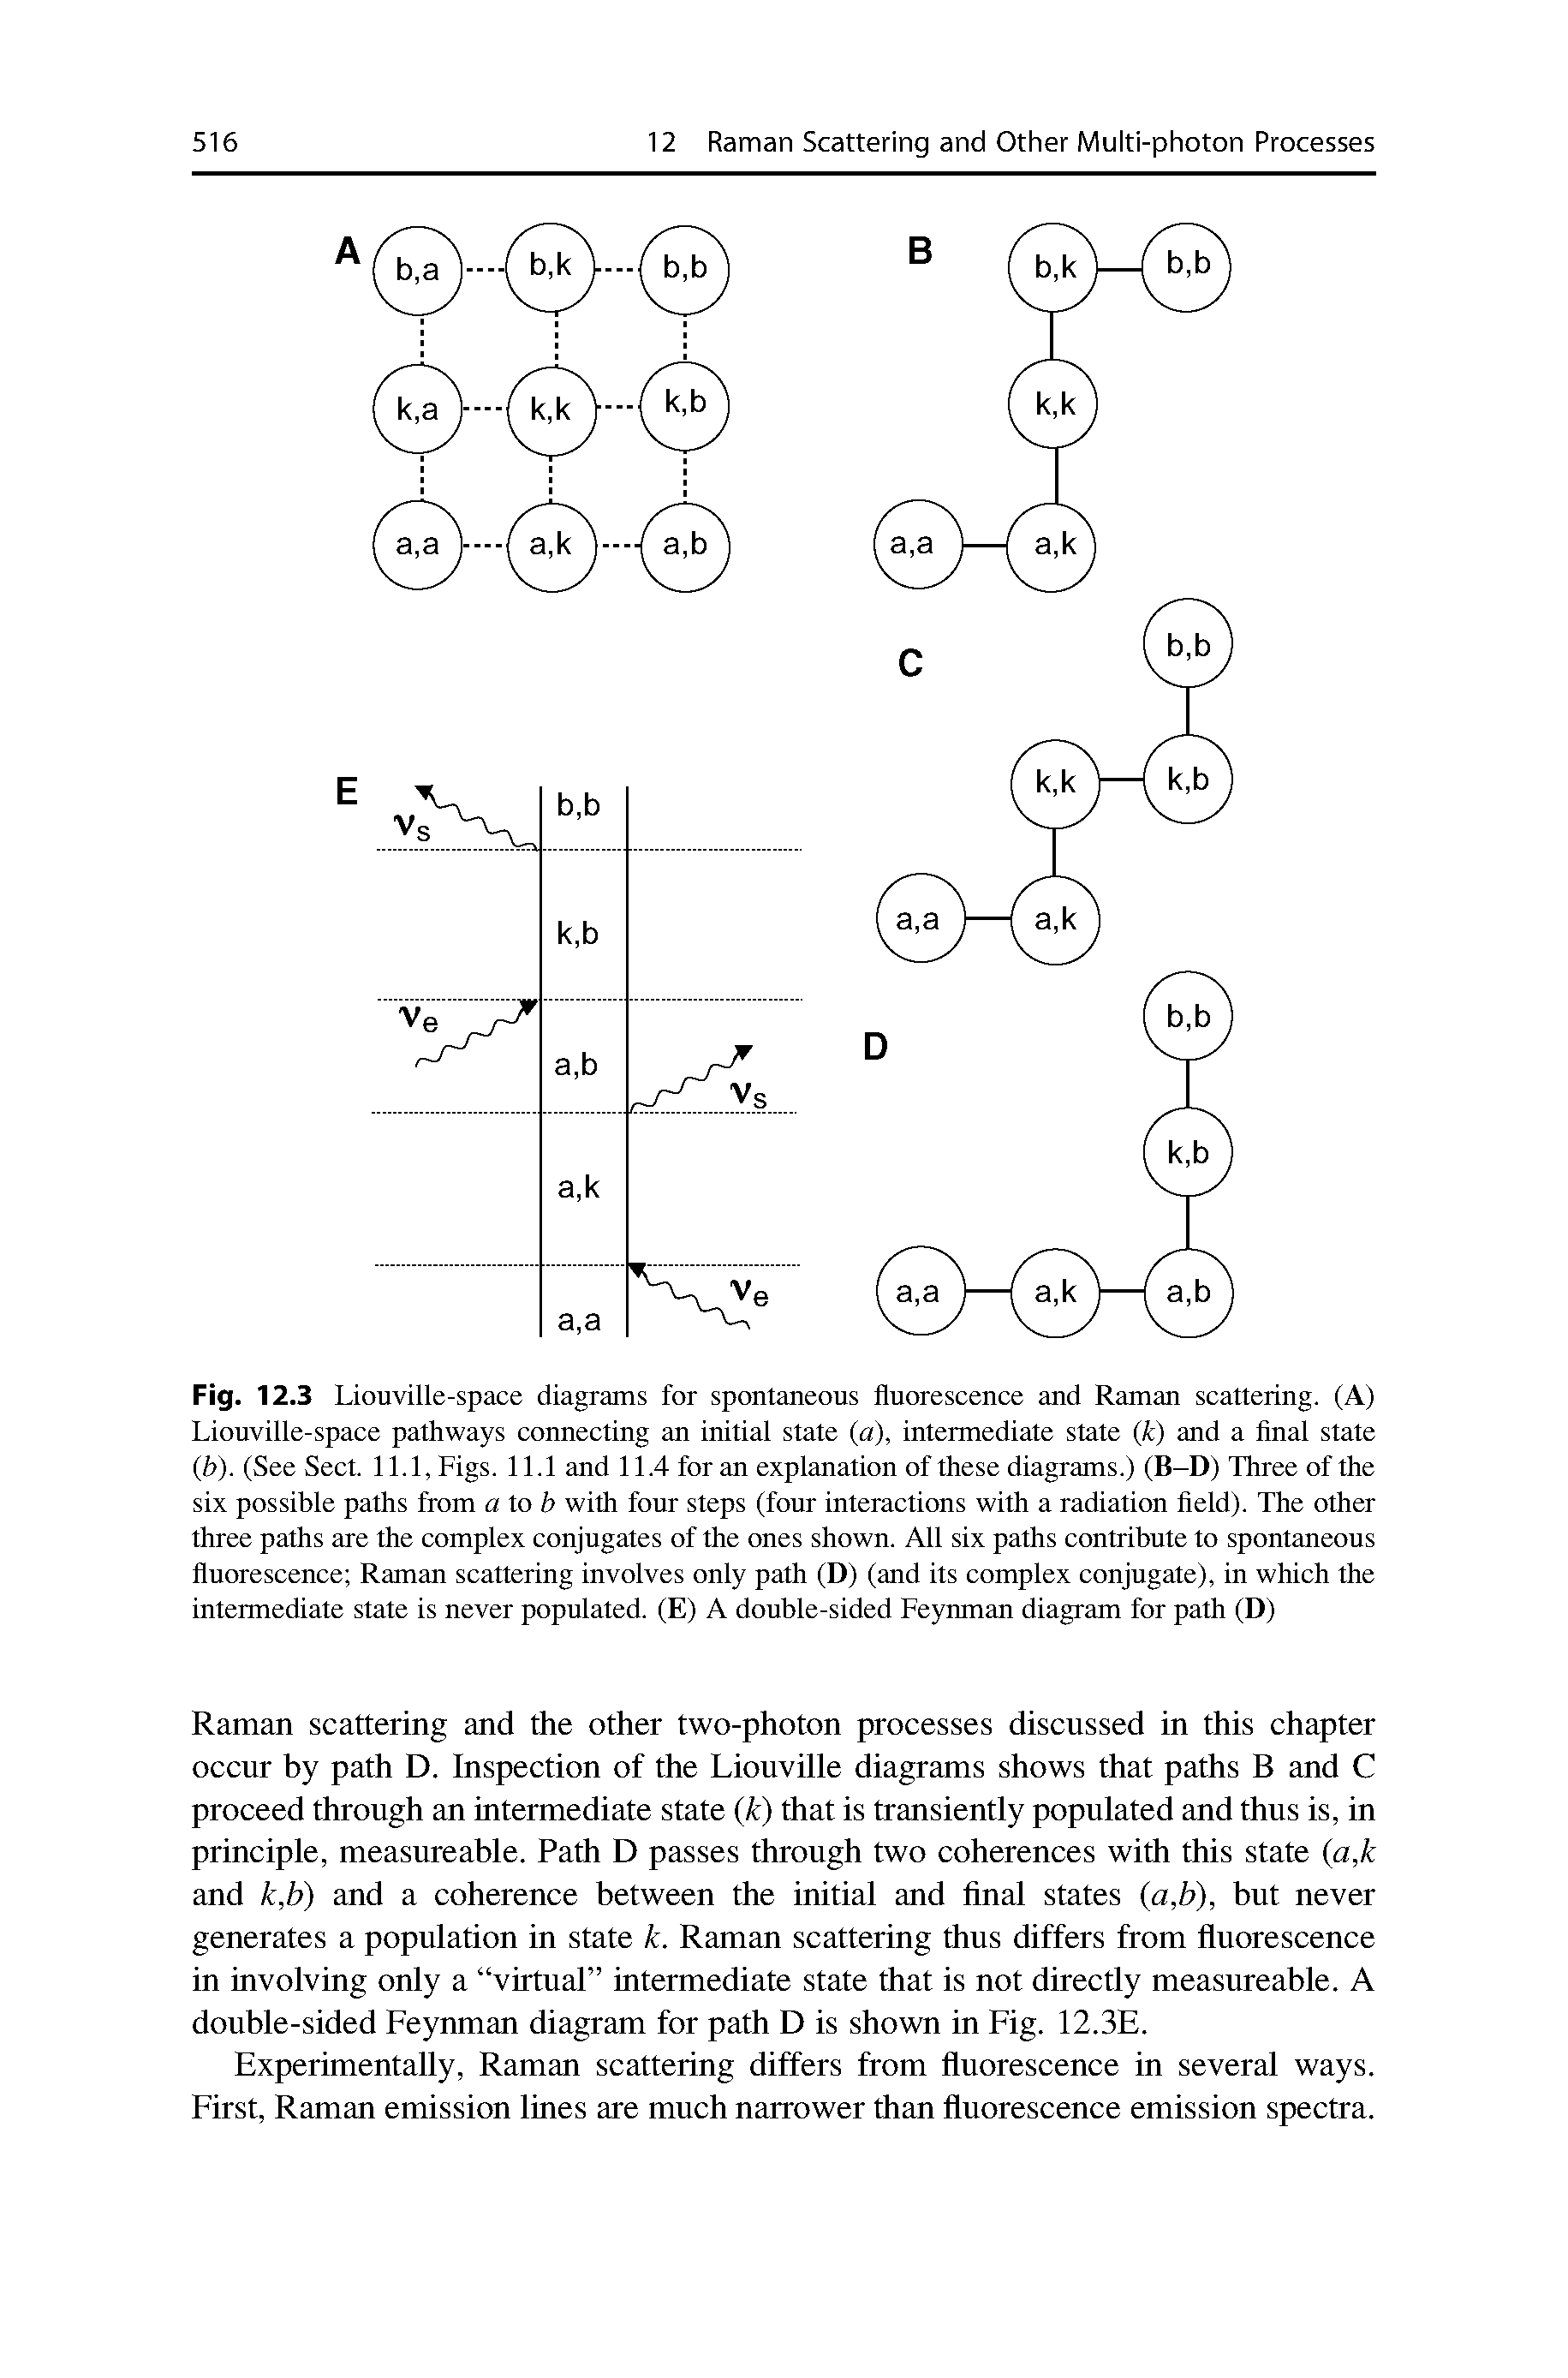 Fig. 12.3 Liouville-space diagrams for spontaneous fluorescence and Raman scattering. (A) Liouville-space pathways connecting an initial state (a), intermediate state (k) and a flnal state (h). (See Sect. 11.1, Figs. 11.1 and 11.4 for an explanation of these diagrams.) (B-D) Three of the six possible paths from atoh with four steps (four interactions with a radiation held). The other three paths are the complex conjugates of the ones shown. All six paths contribute to spontaneous fluorescence Raman scattering involves only path (D) (and its complex conjugate), in which the intermediate state is never populated. (E) A double-sided Feynman diagram for path (D)...